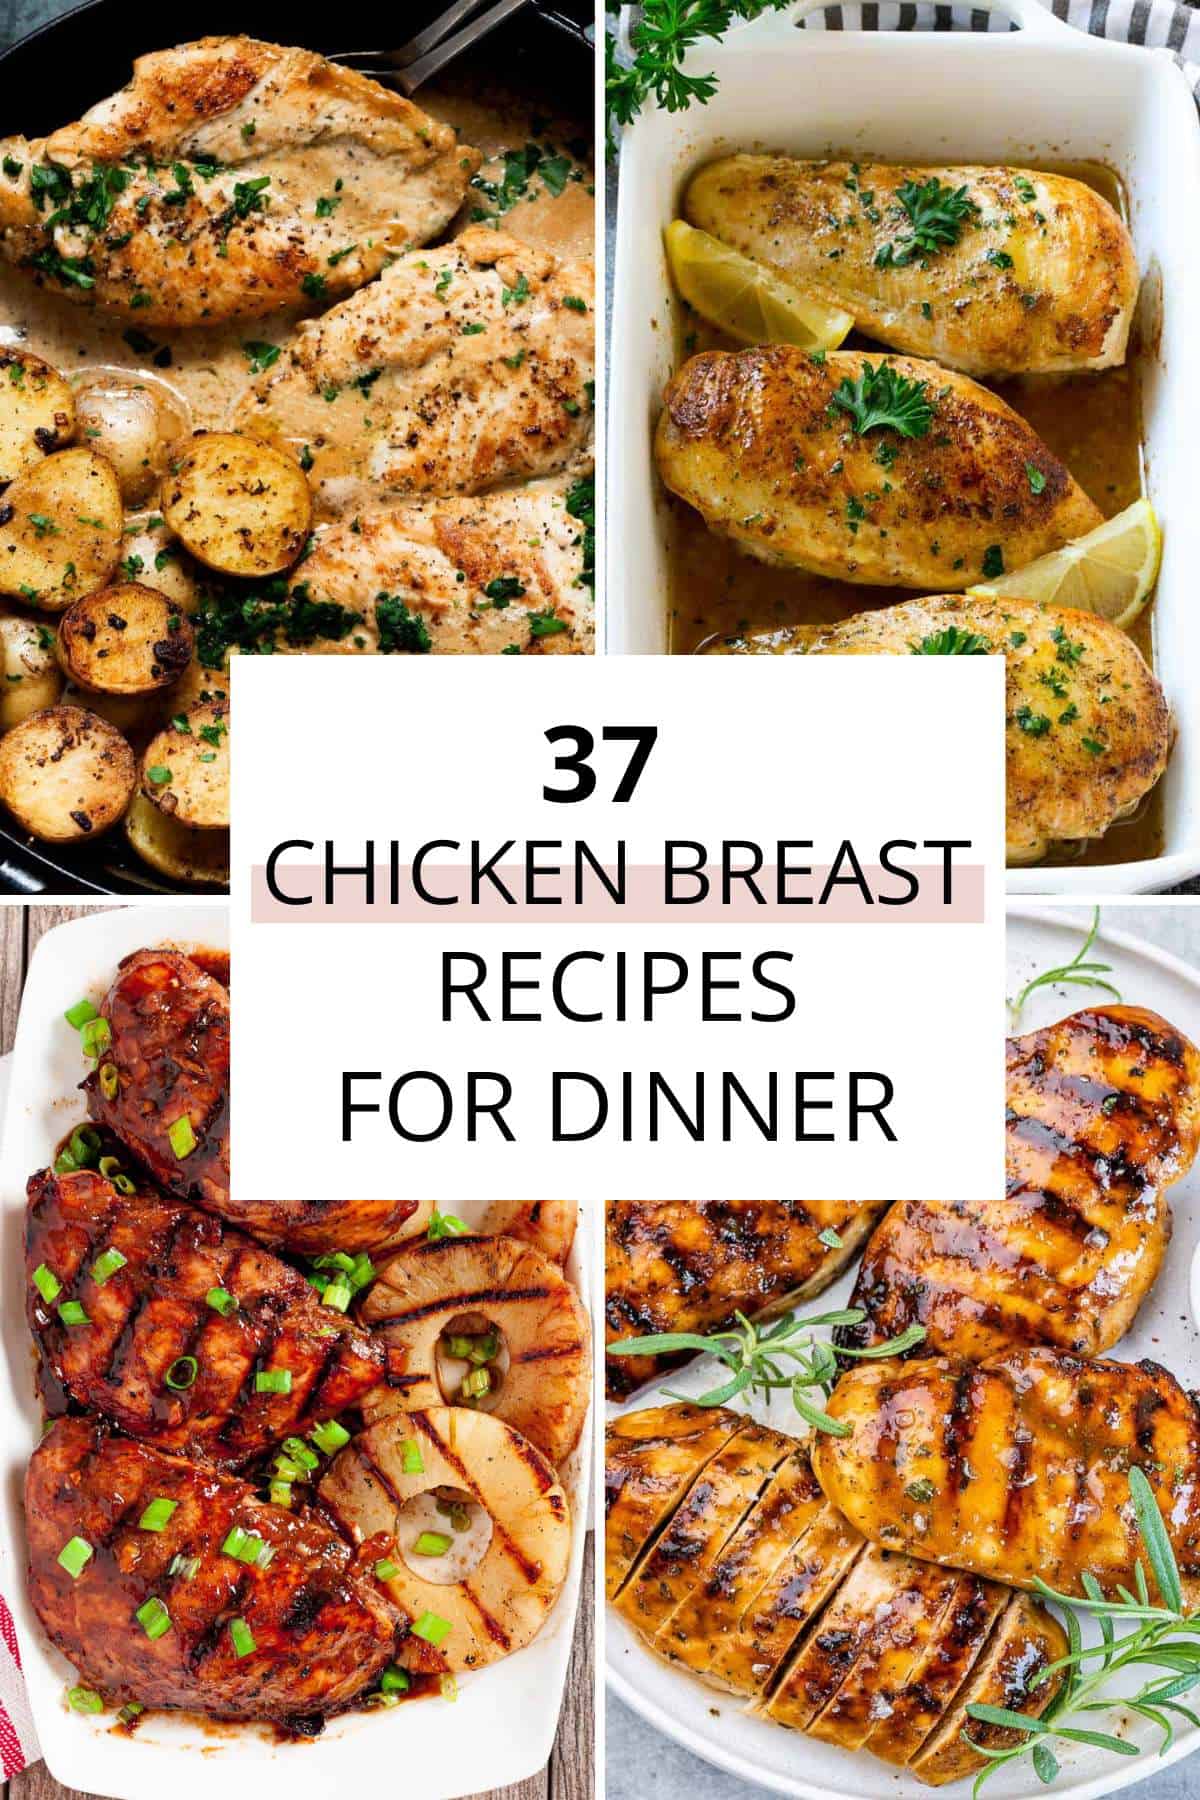 Four varied chicken breast recipes presented as dinner ideas.